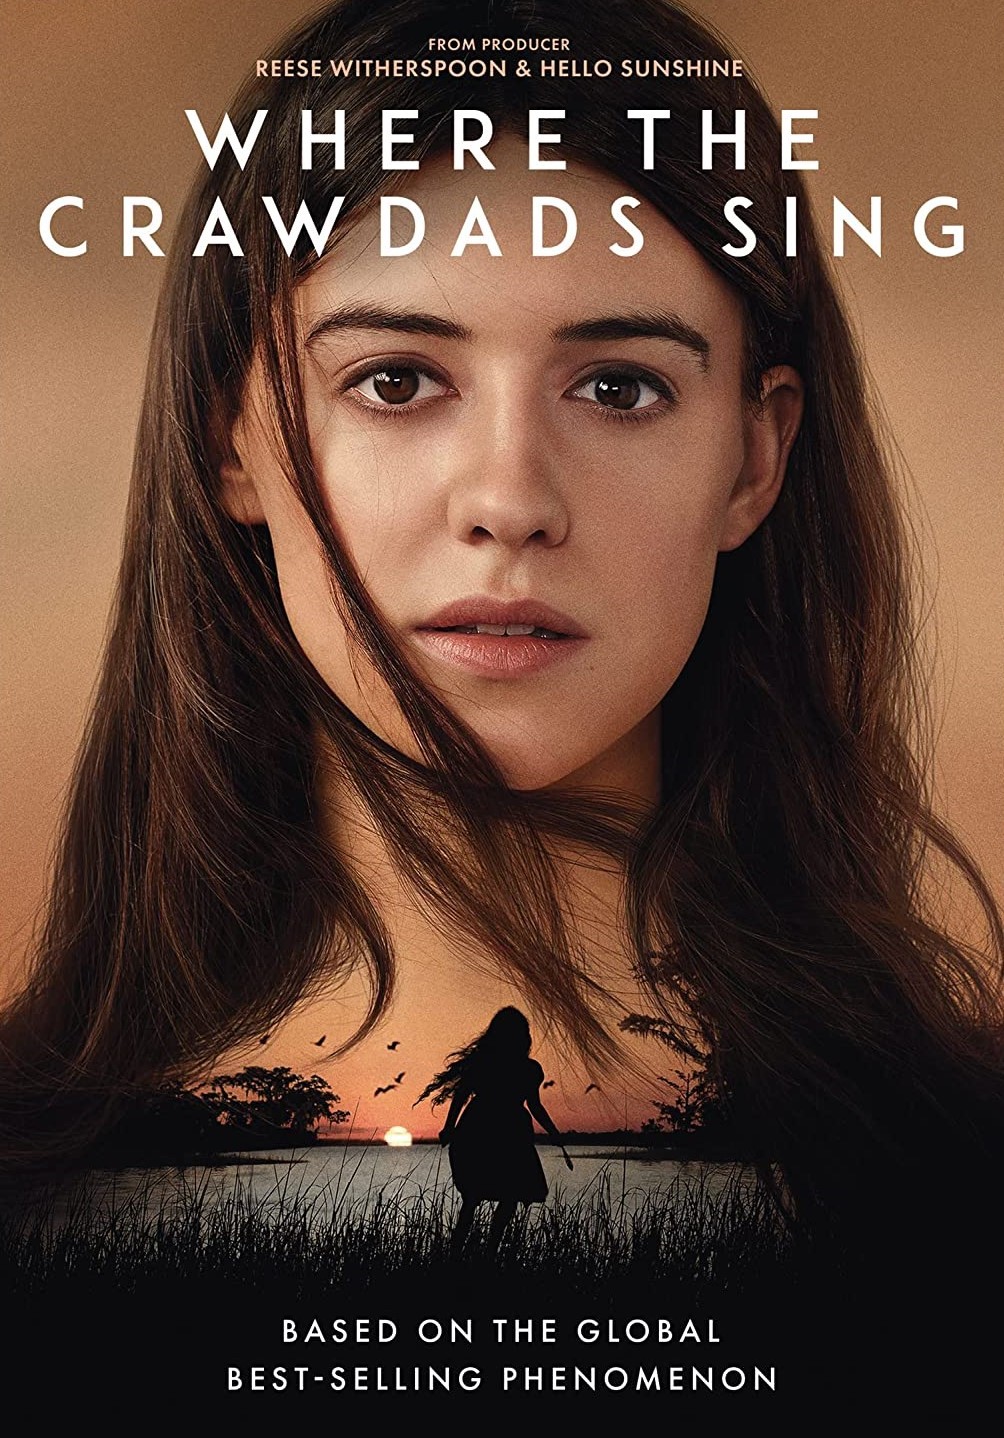 Where the Crawdads Sing DVD cover